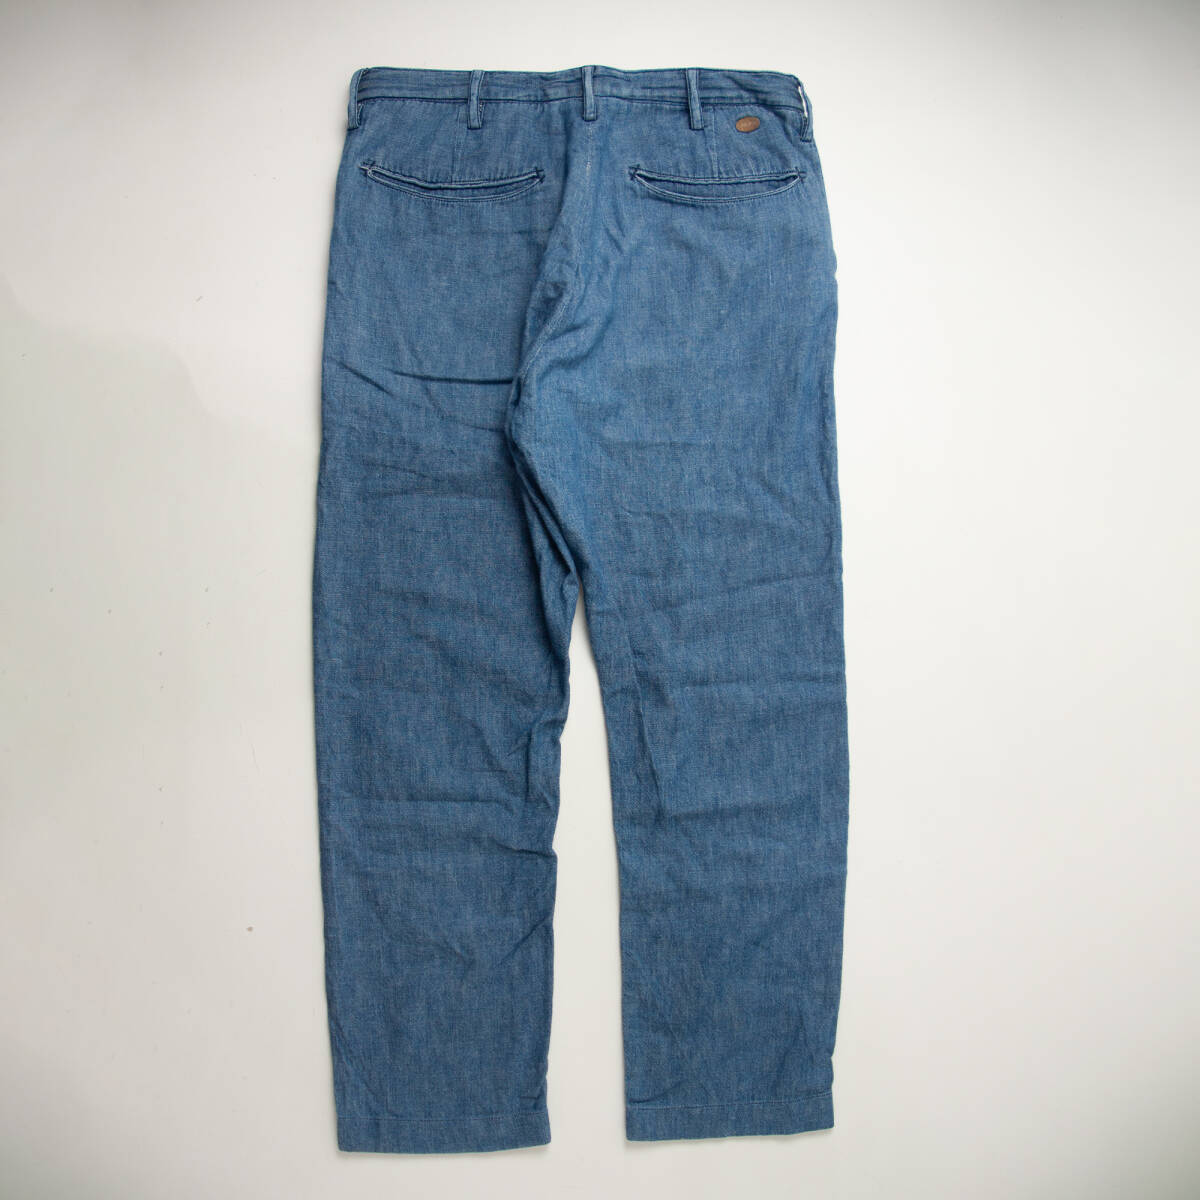  Stephen son overall 940 OLD GLORY car n blur - work pants 